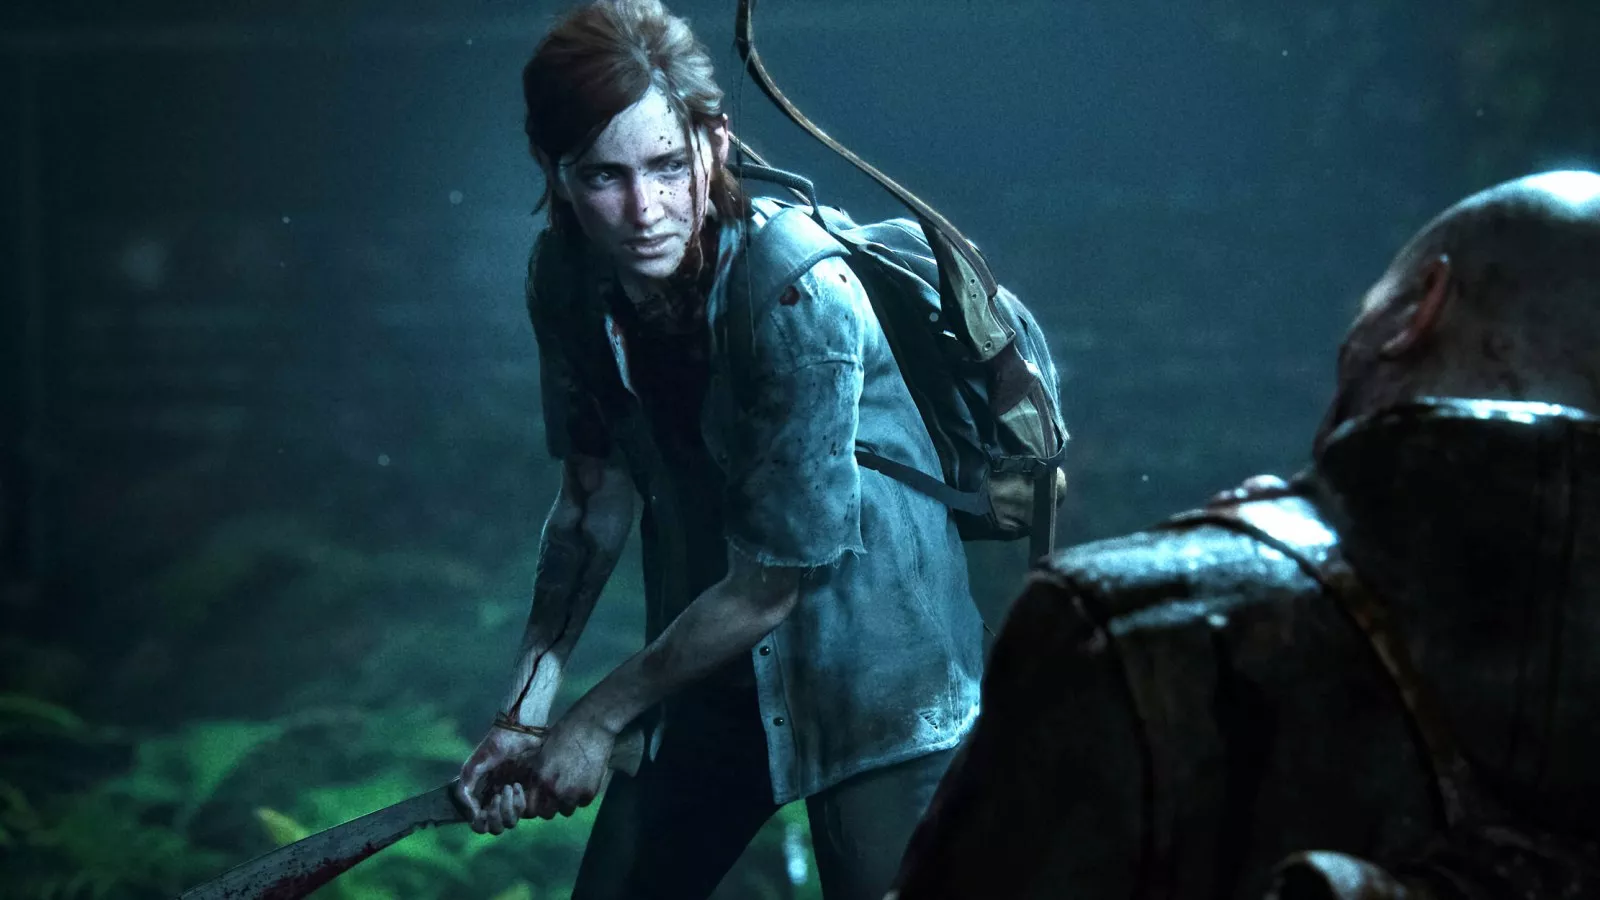 The Last of Us Part II players on PS4 - Naughty Dog, LLC